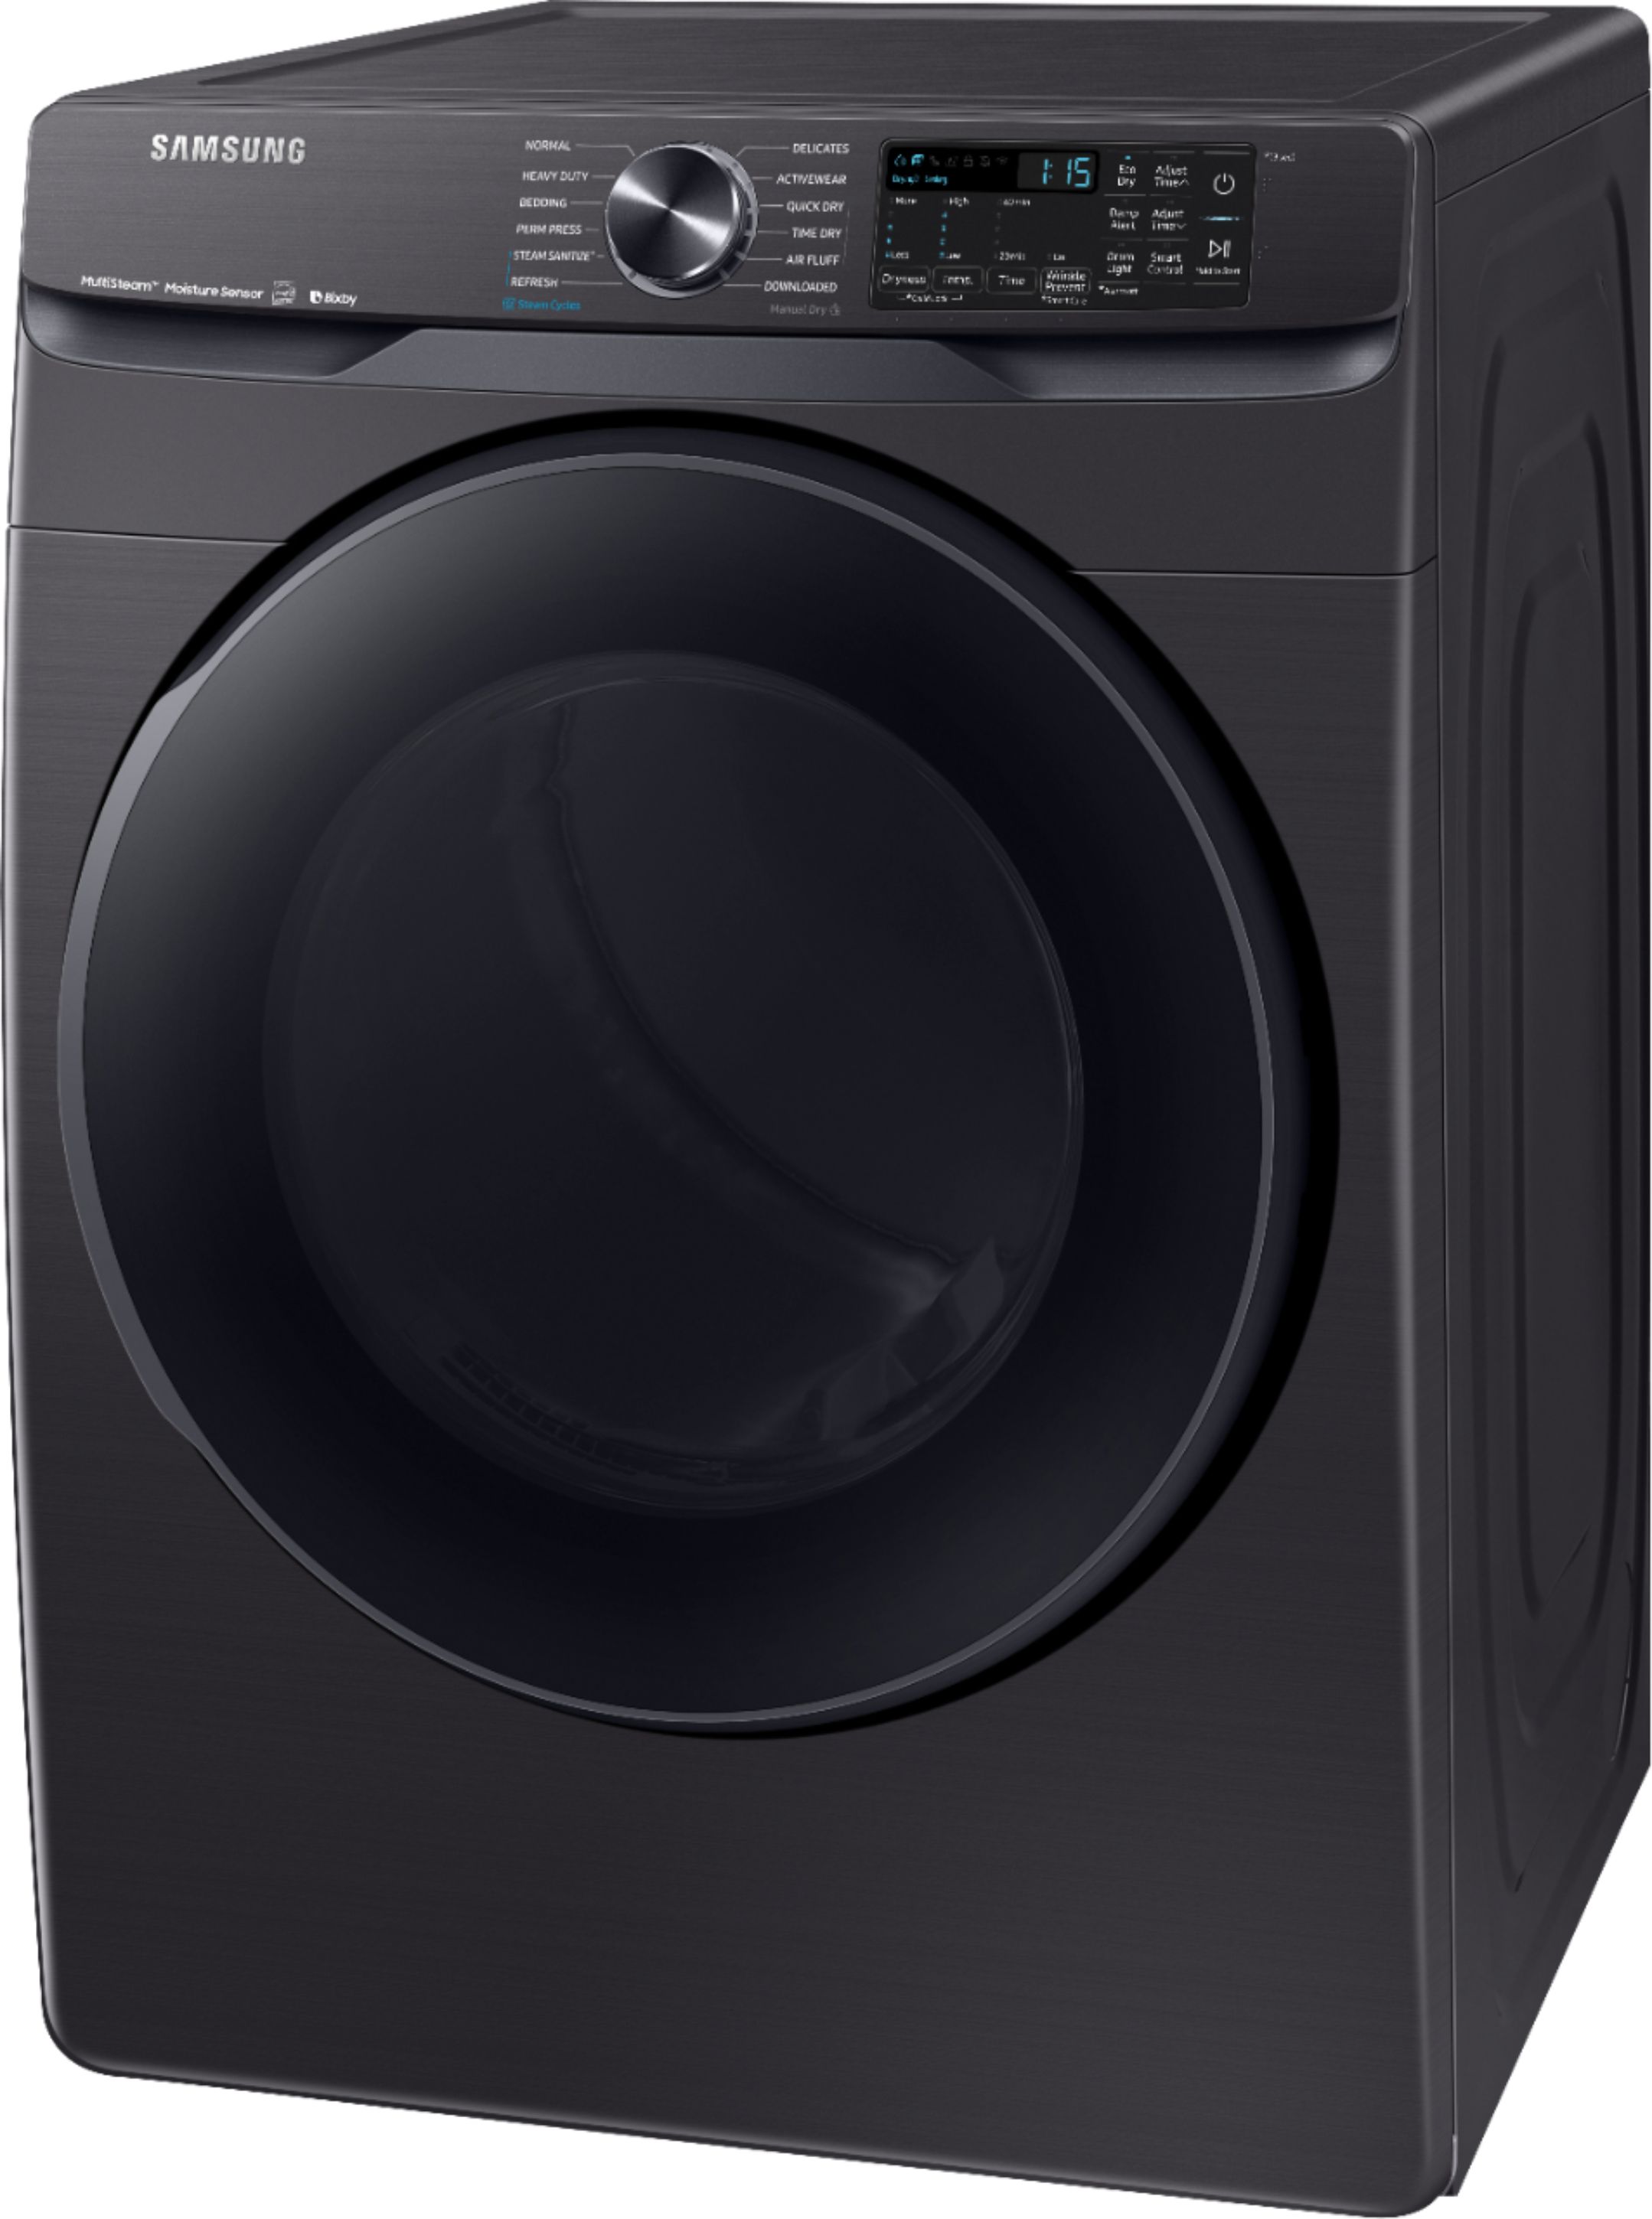 Left View: Samsung - 7.4 Cu. Ft. Gas Dryer with Steam and Sensor Dry - Fingerprint Resistant Black Stainless Steel